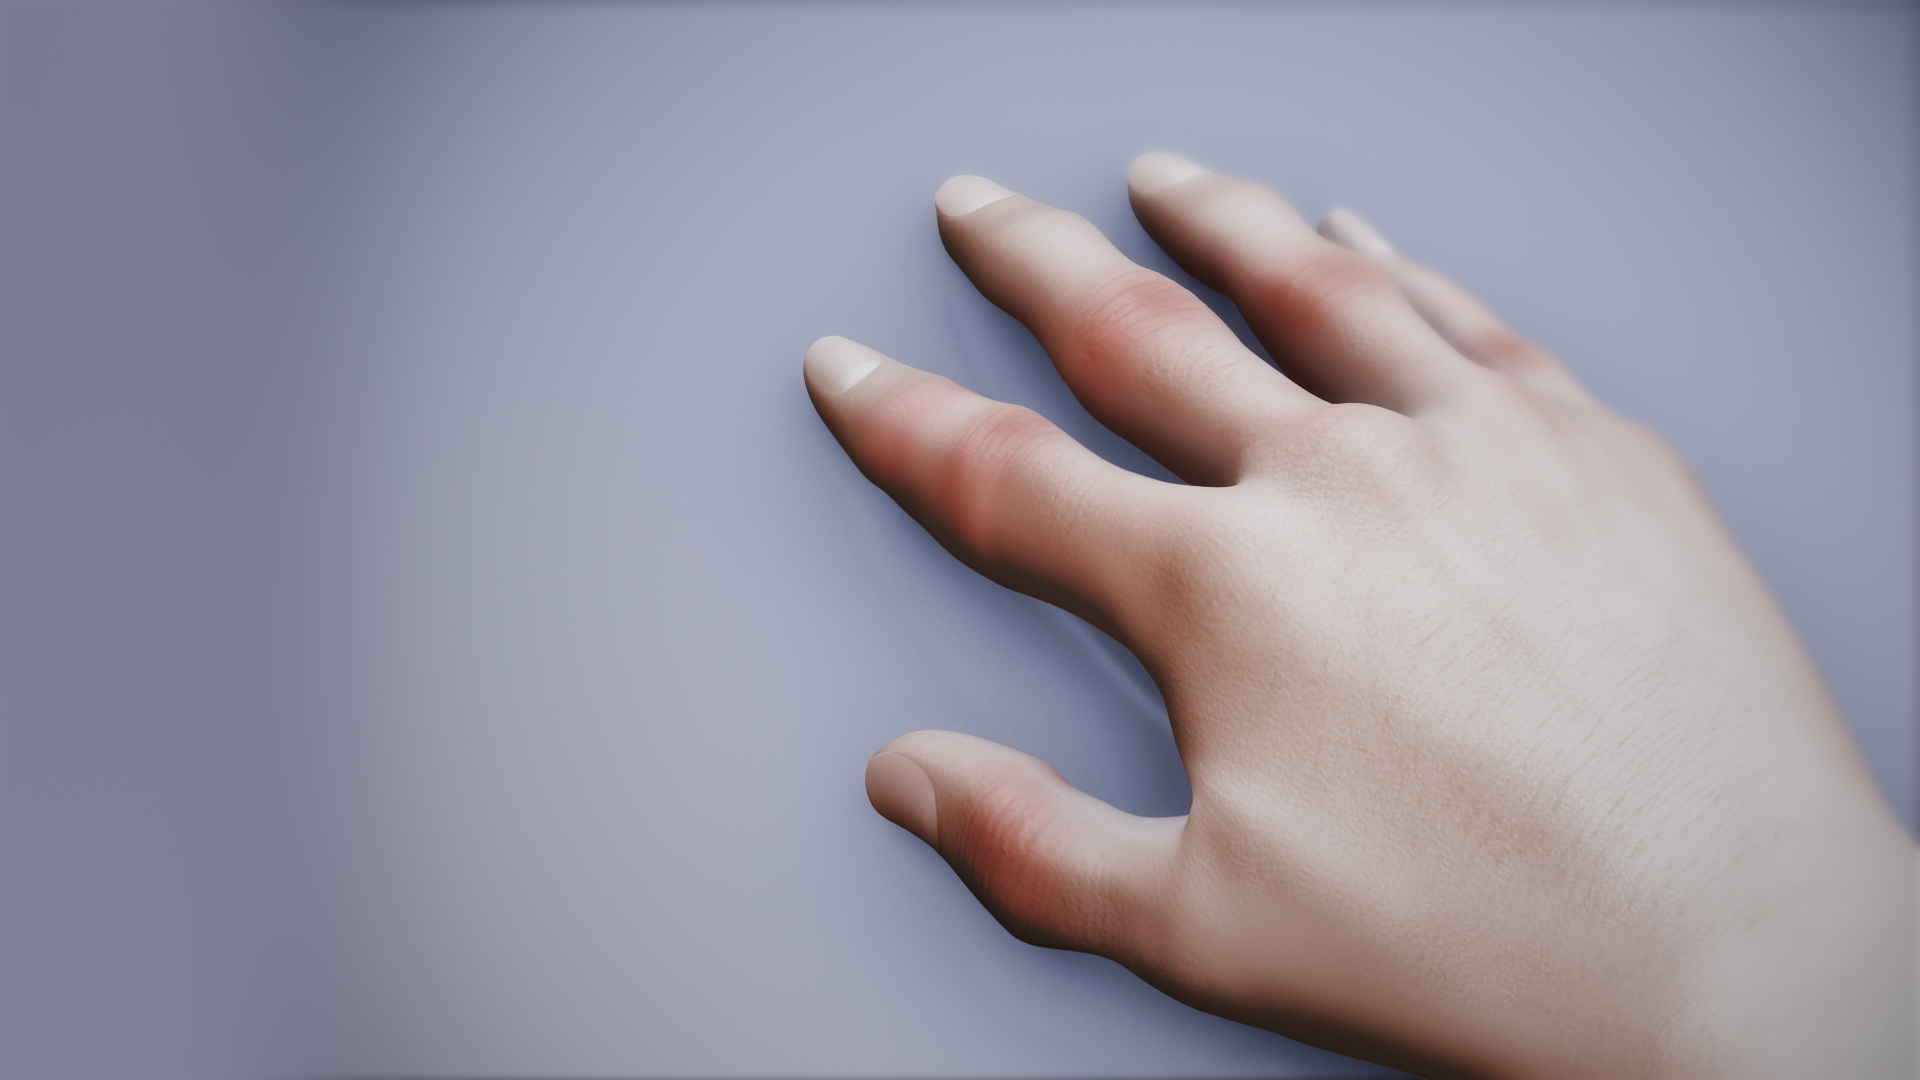 3D Medical Animation still of Gout infected hand.